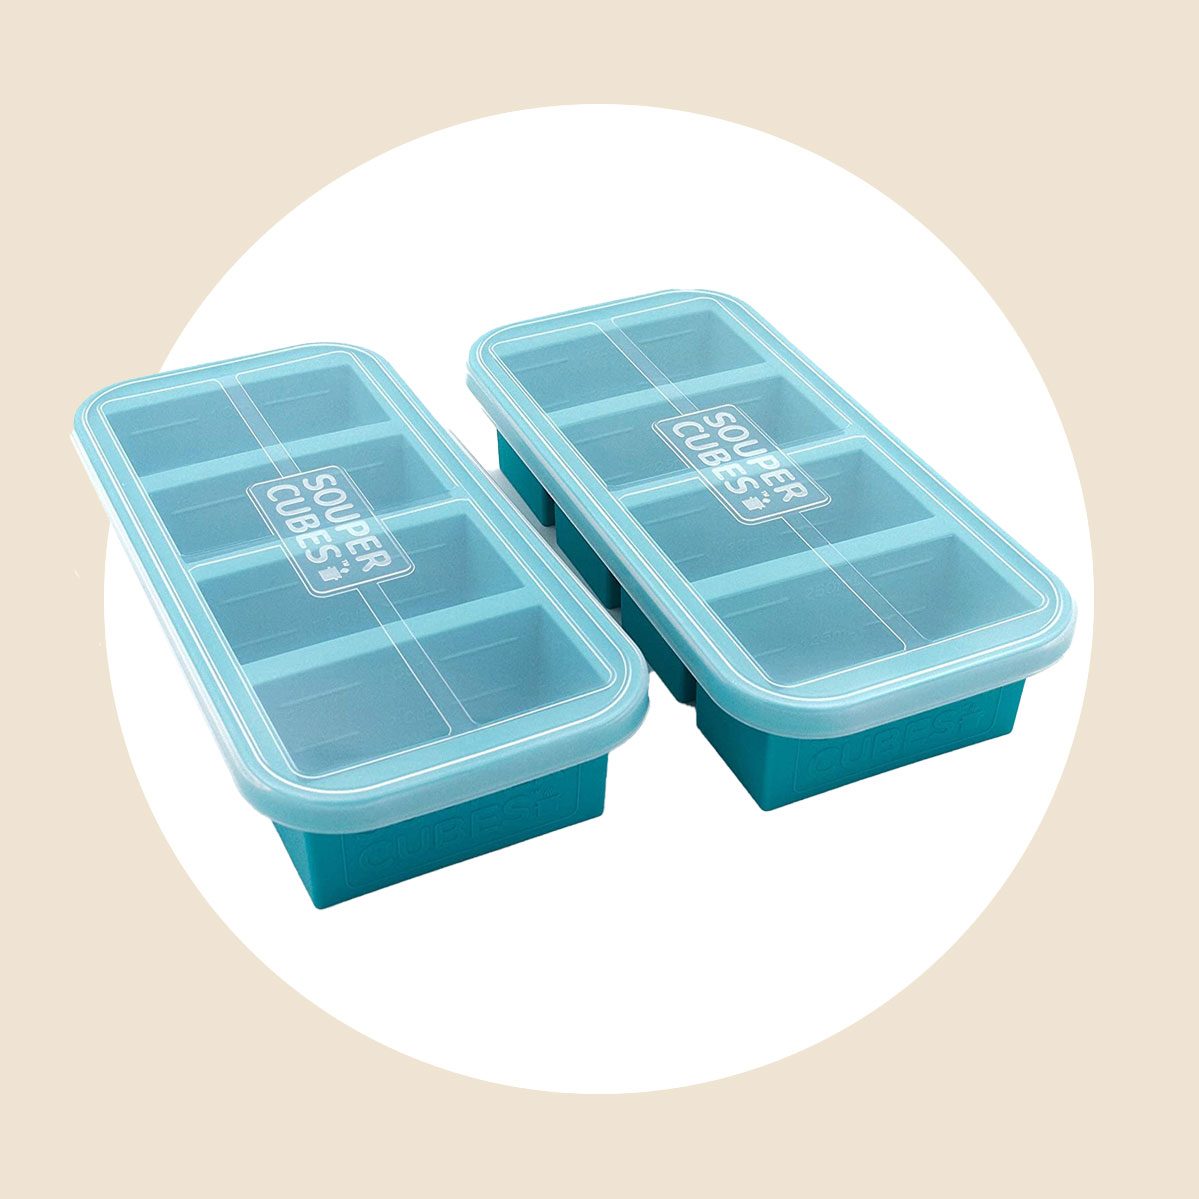 Freezer containers will save you time and energy Order now from website:  link in bio #tupperware #tupperwareegyptofficial #freezer…